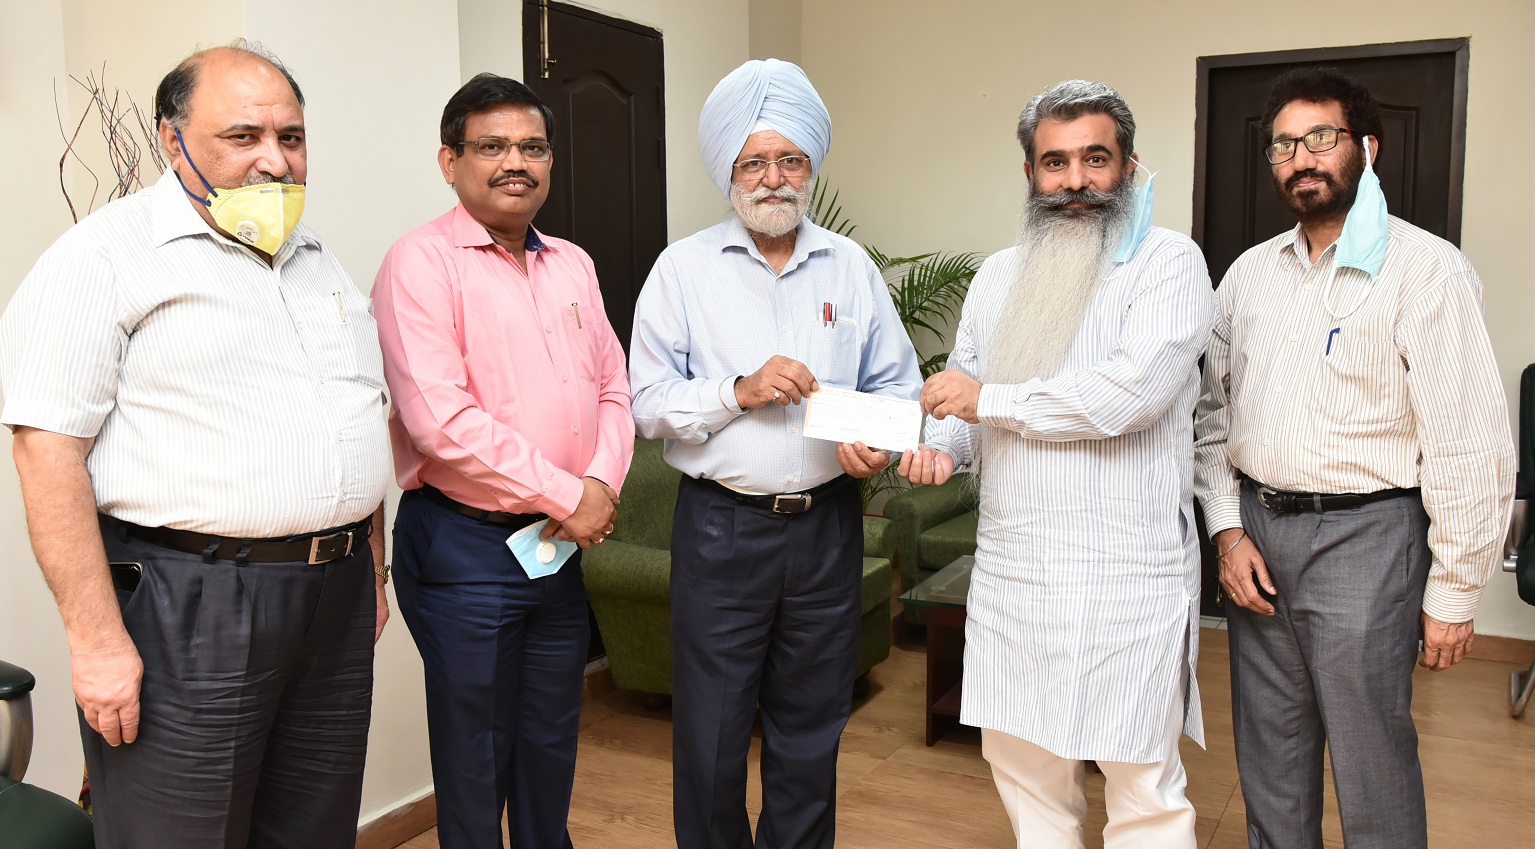 VC PAU hands over cheque of Rs.72.56 lakh on behalf of PAU staff for CM Covid 19 relief fund